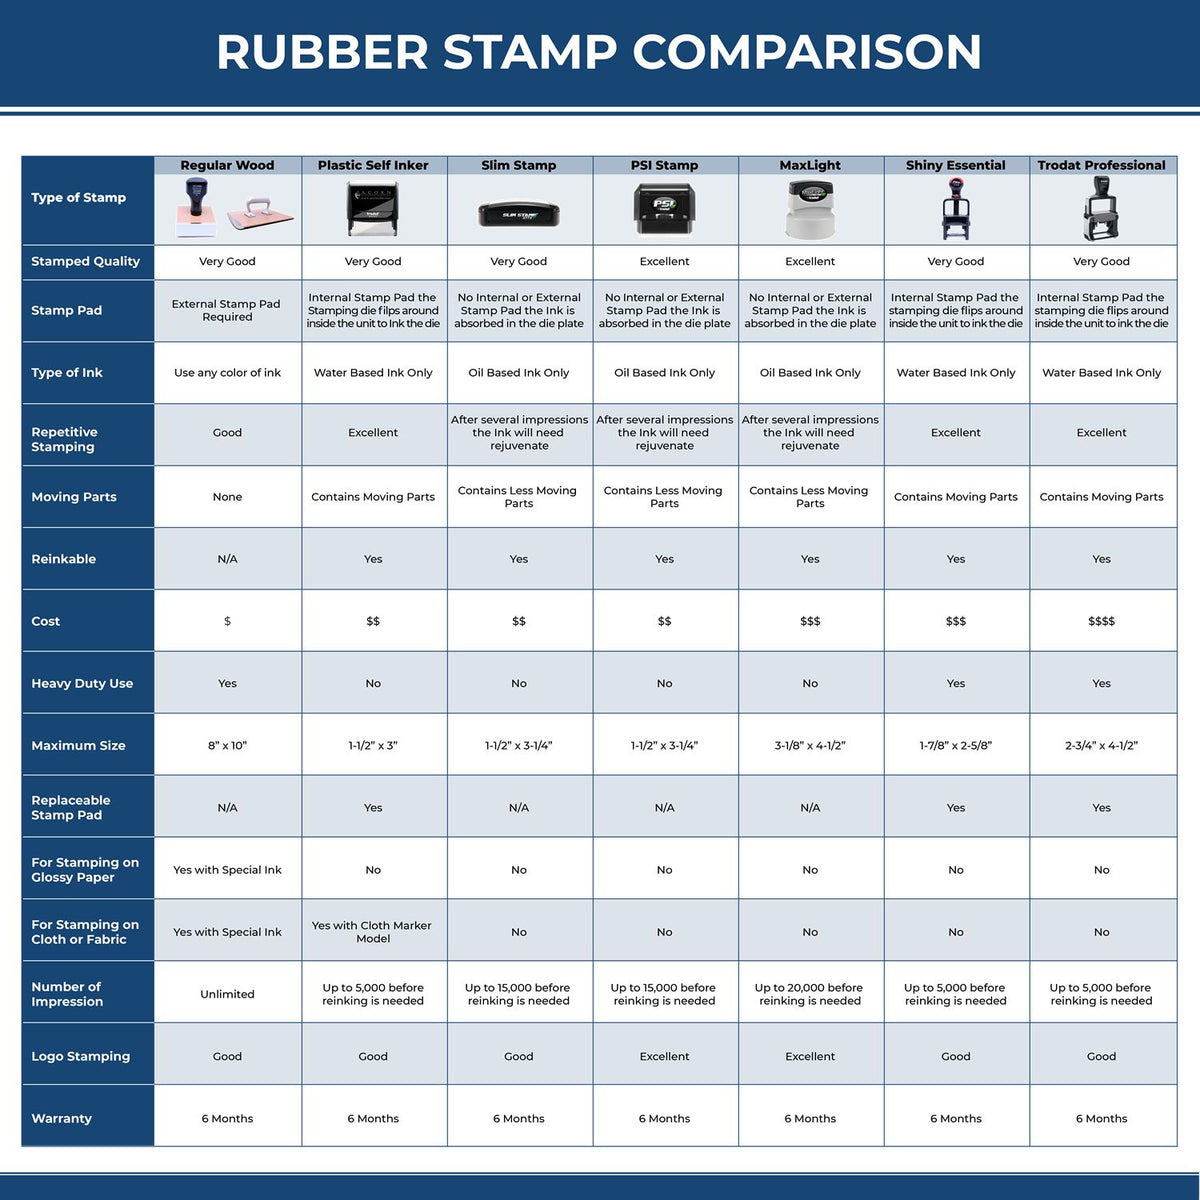 A comparison chart for the different types of mount models available for the PSI New York Notary Stamp.